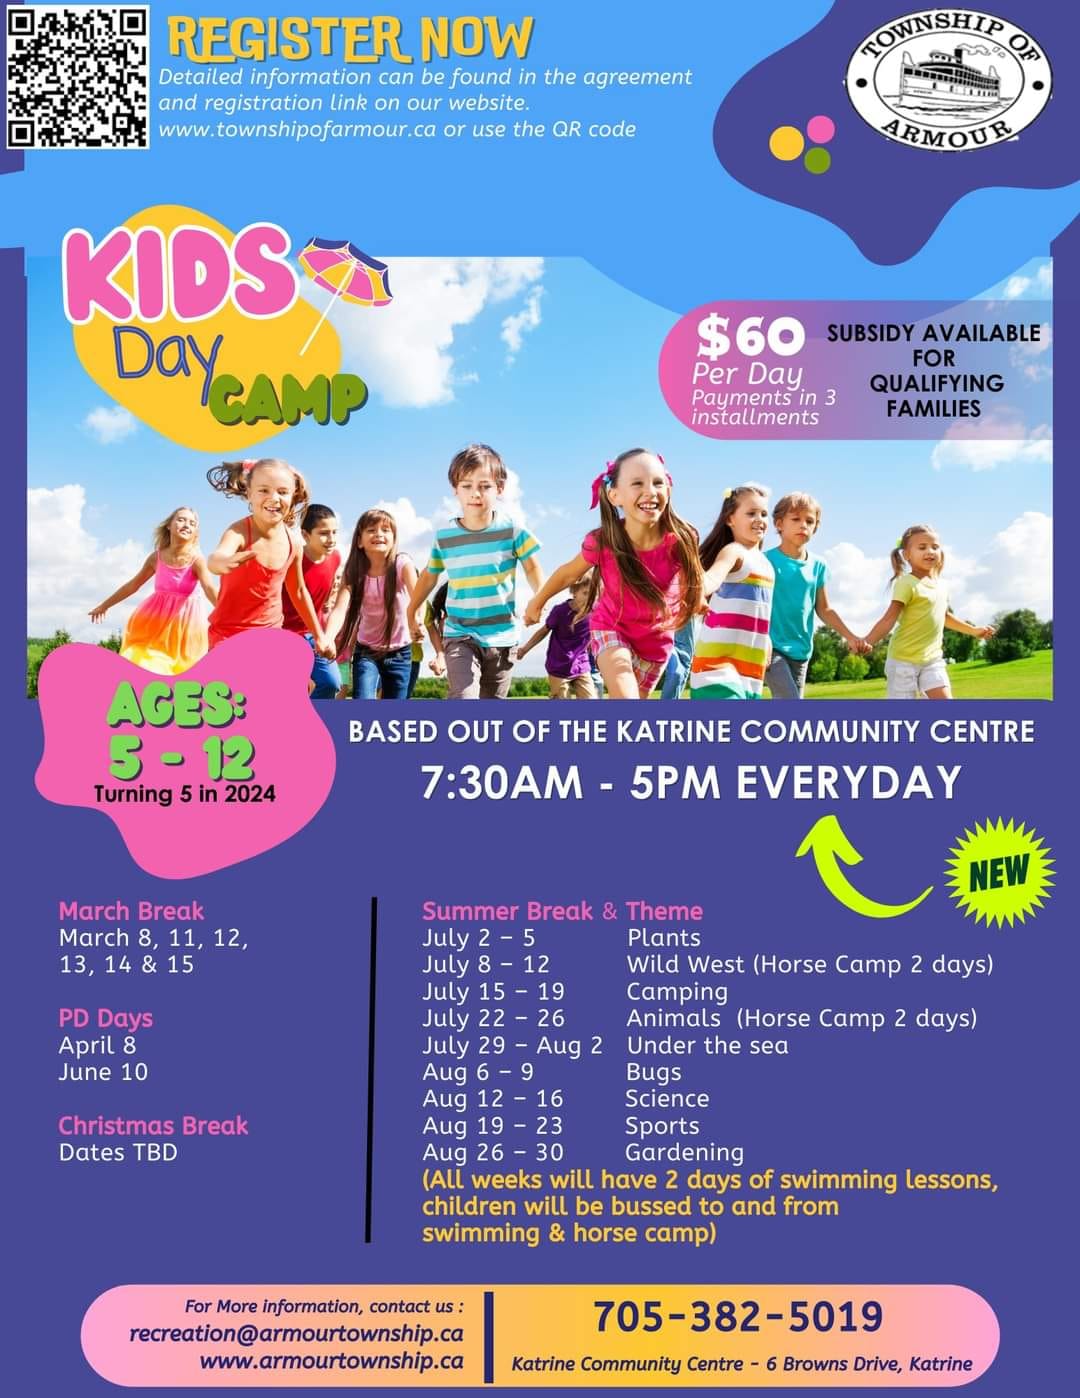 Kids Day Camp- March Break, PD Days, Summer & Christmas